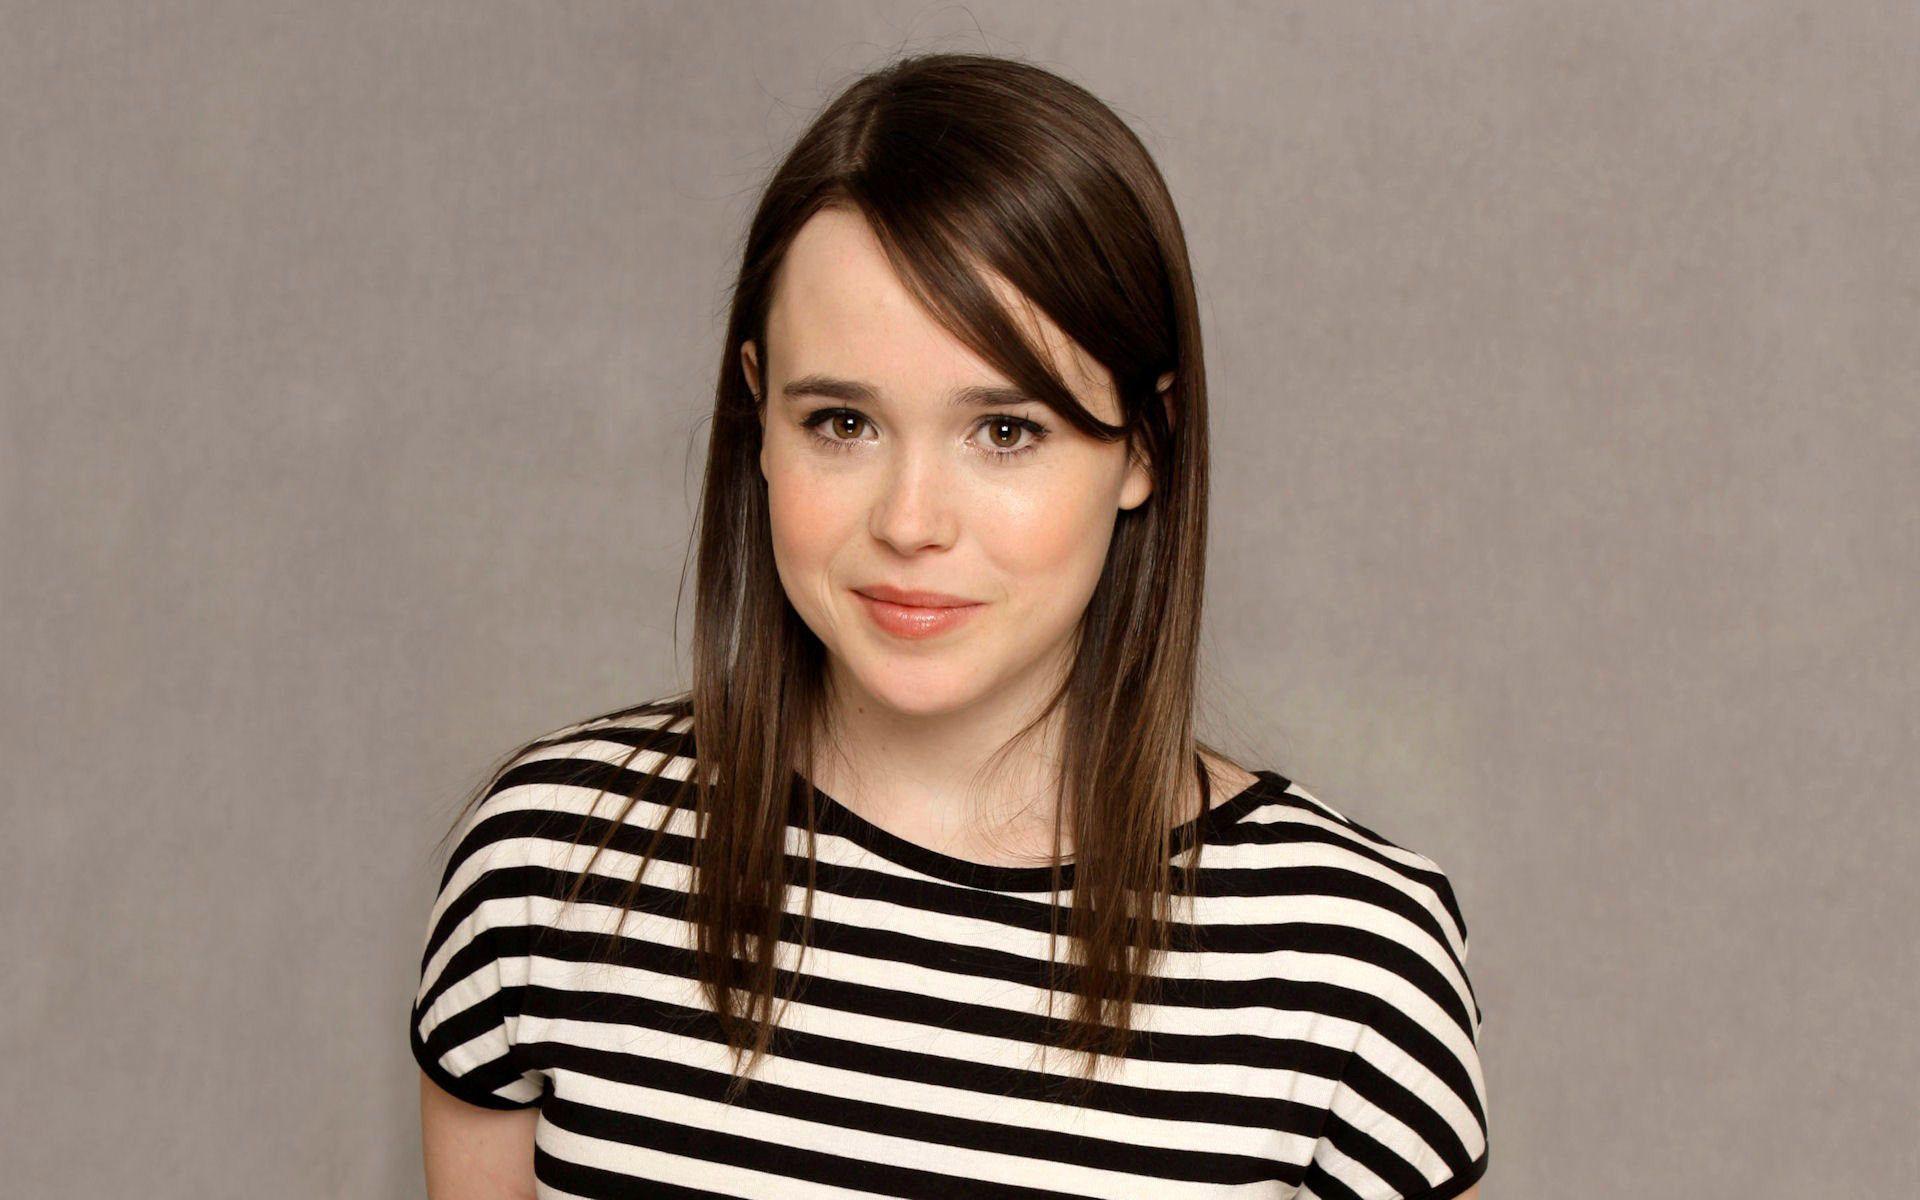 Ellen Page Wallpaper with Interesting Facts